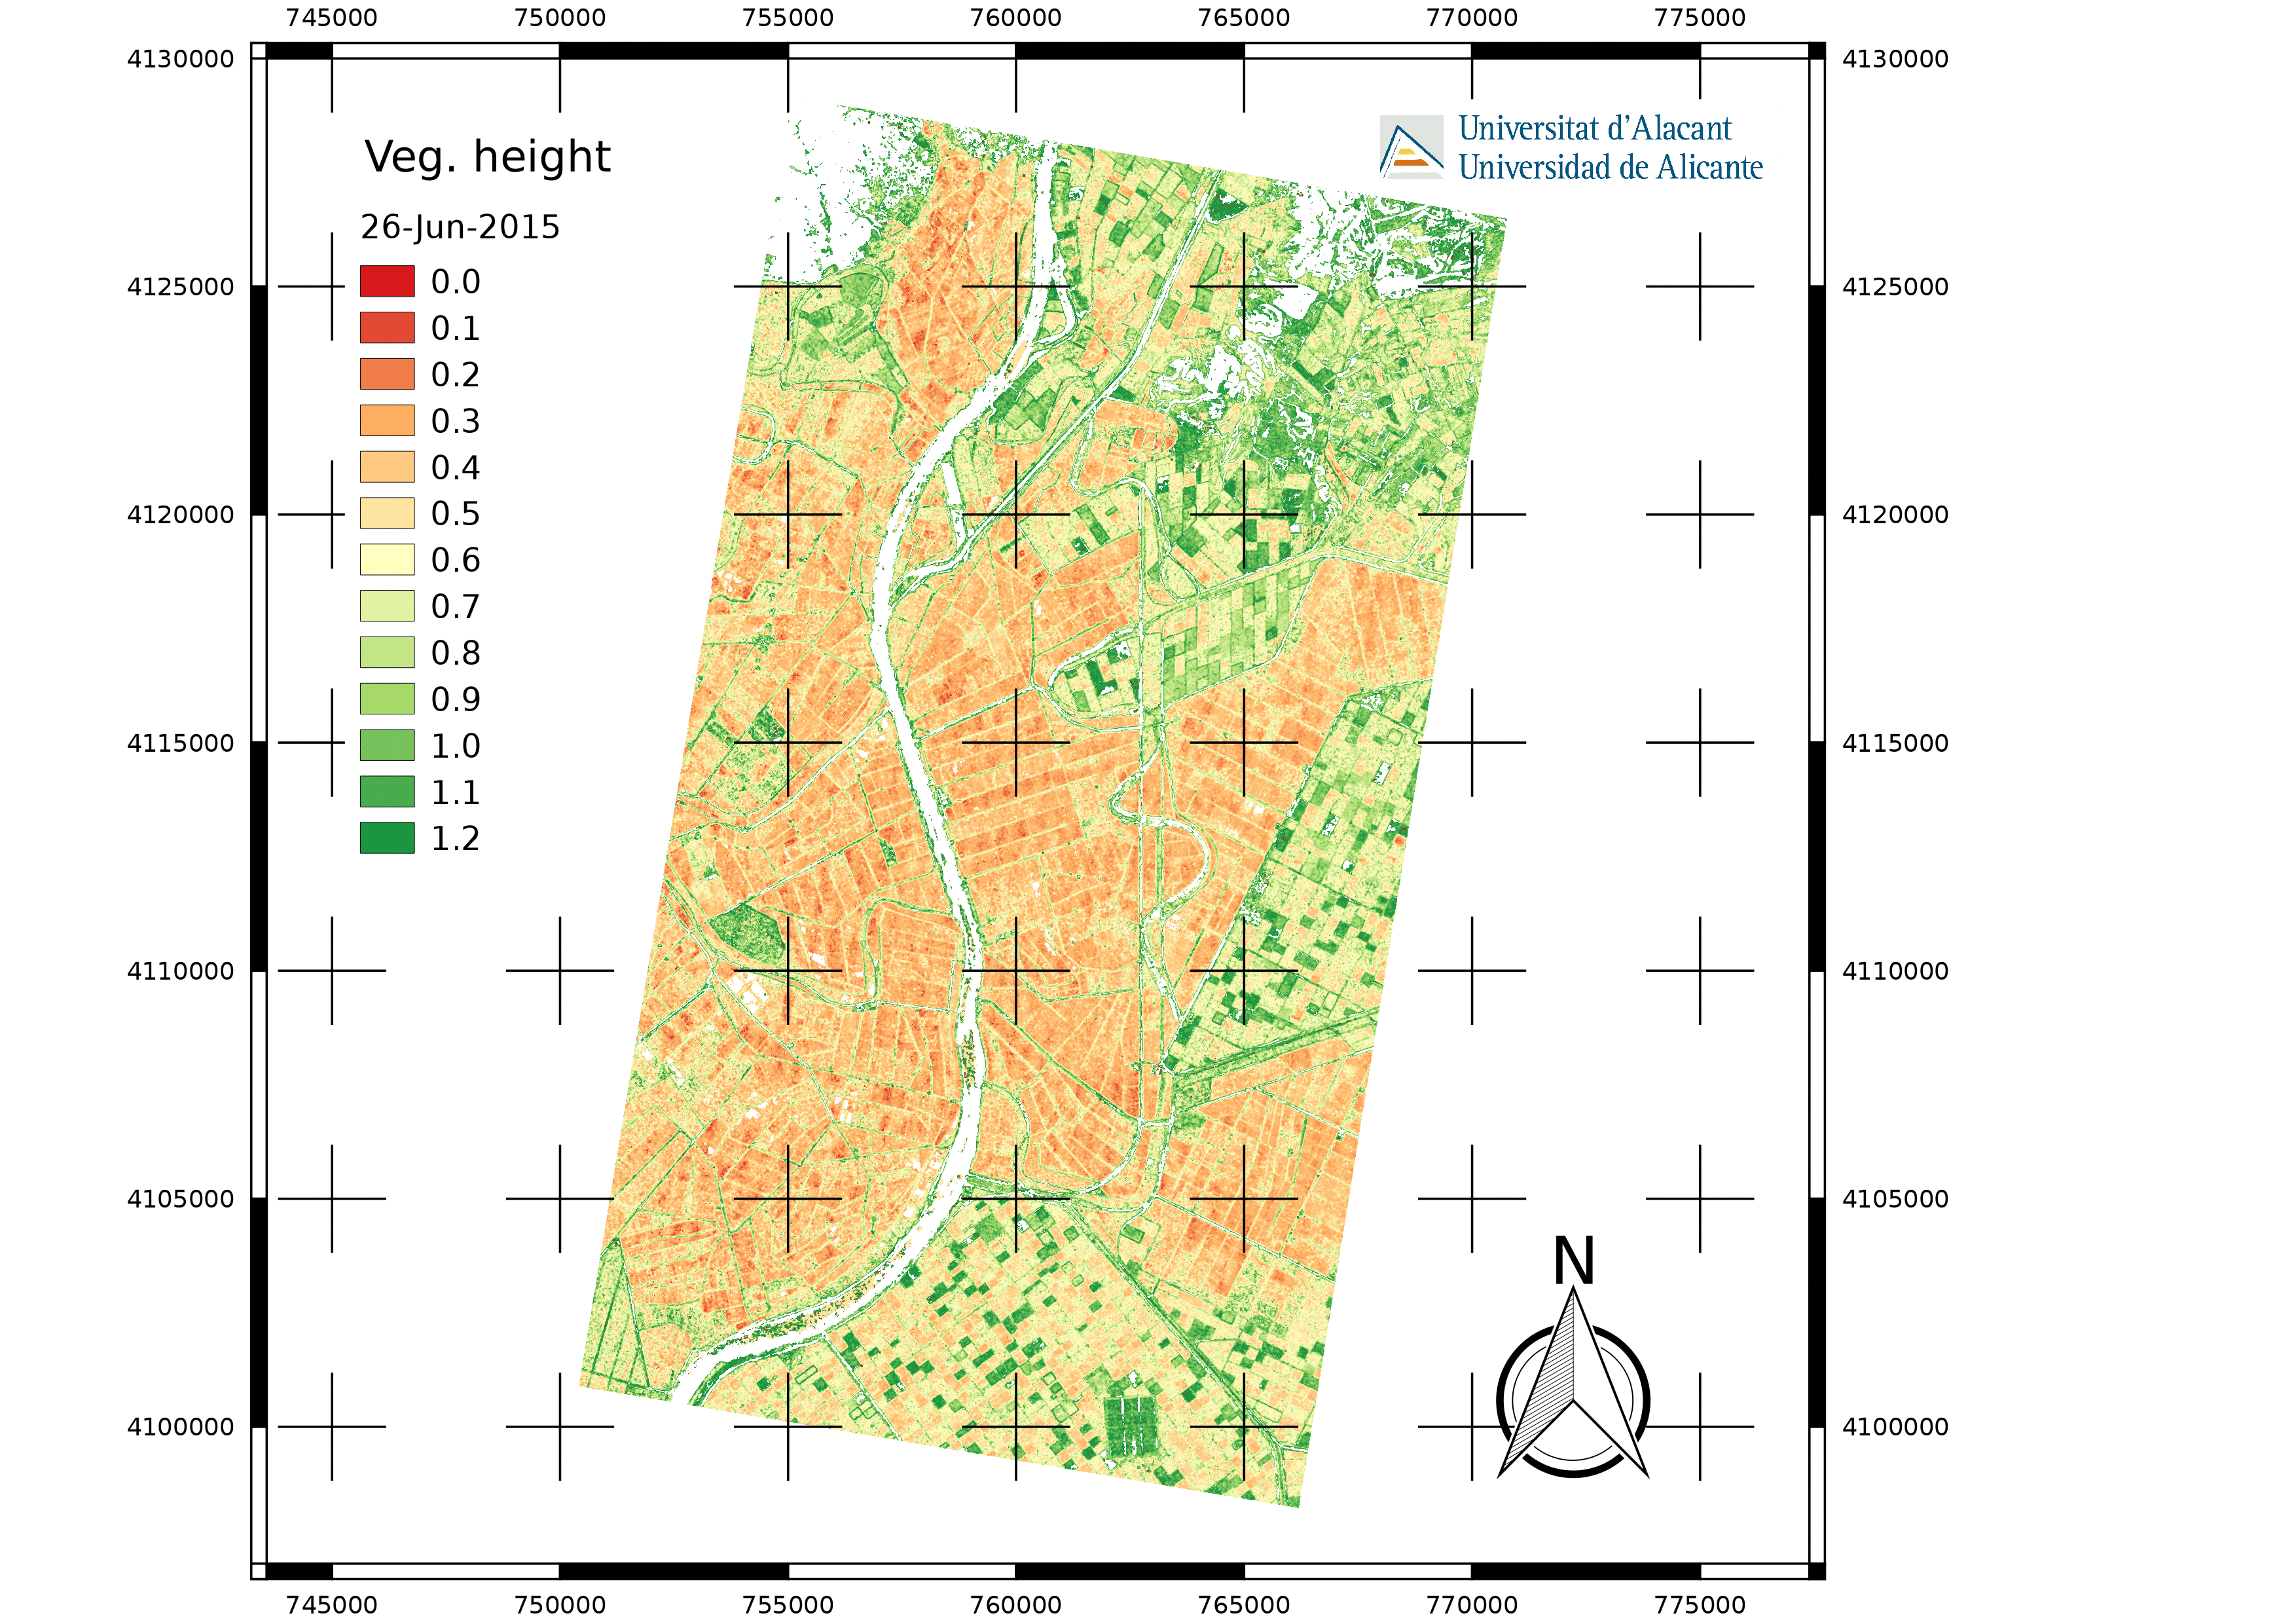 Vegetation height in a rice area close to Sevilla (SW Spain), retrieved by means of polarimetric SAR interferometry (PolInSAR) from data acquired by the TanDEM-X sensor. The German Aerospace Center (DLR) provided all the TanDEM-X data under project NTI-POLI6736.